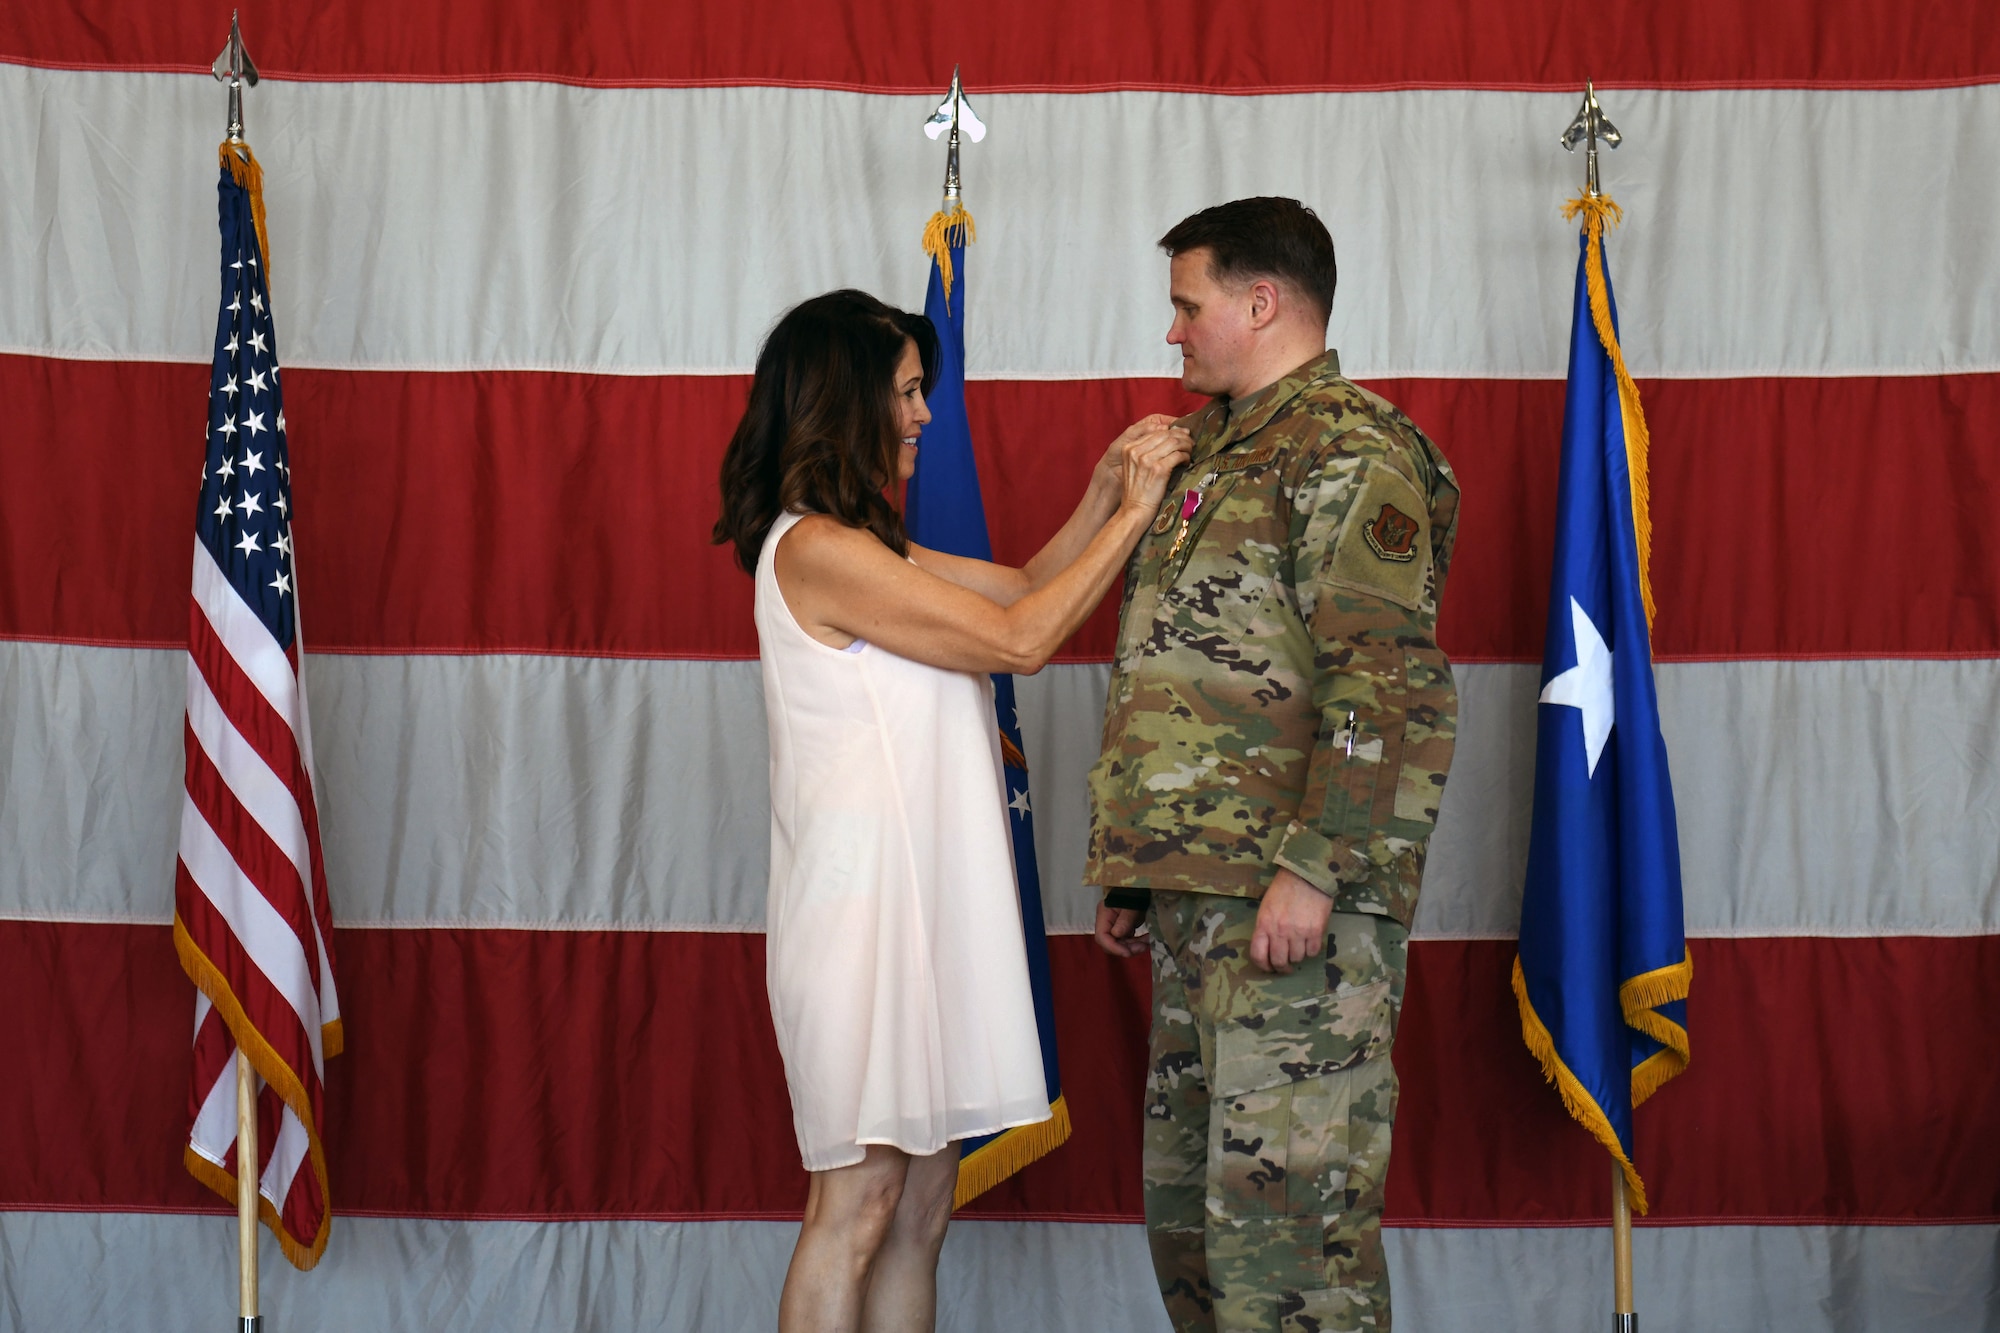 Bonnie Tesch Strazz, spouse of Chief Master Sgt. Paul Strazz, places a pin on her husband’s lapel to celebrate his retirement from the Air Force Reserve June 6, 2021 at Hill Air Force Base, Utah. Strazz served 30 years in the Air Force, including 23 years in the Air Force Reserve.